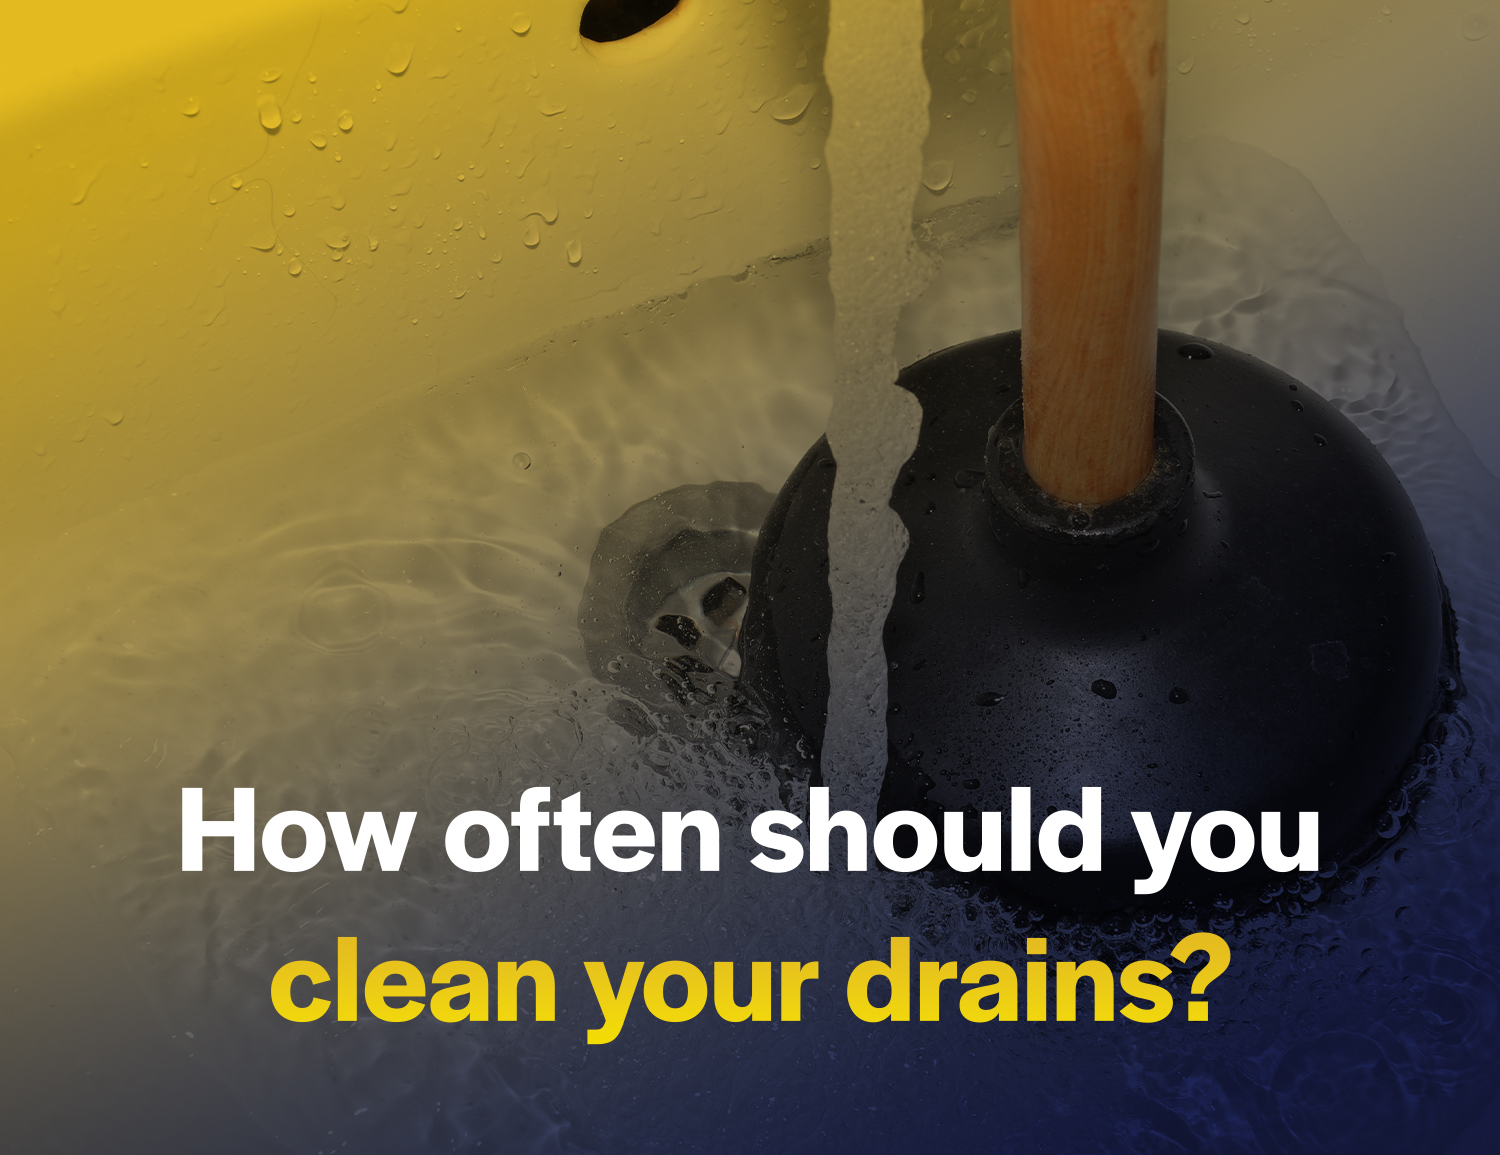 How often should you clean your drains?